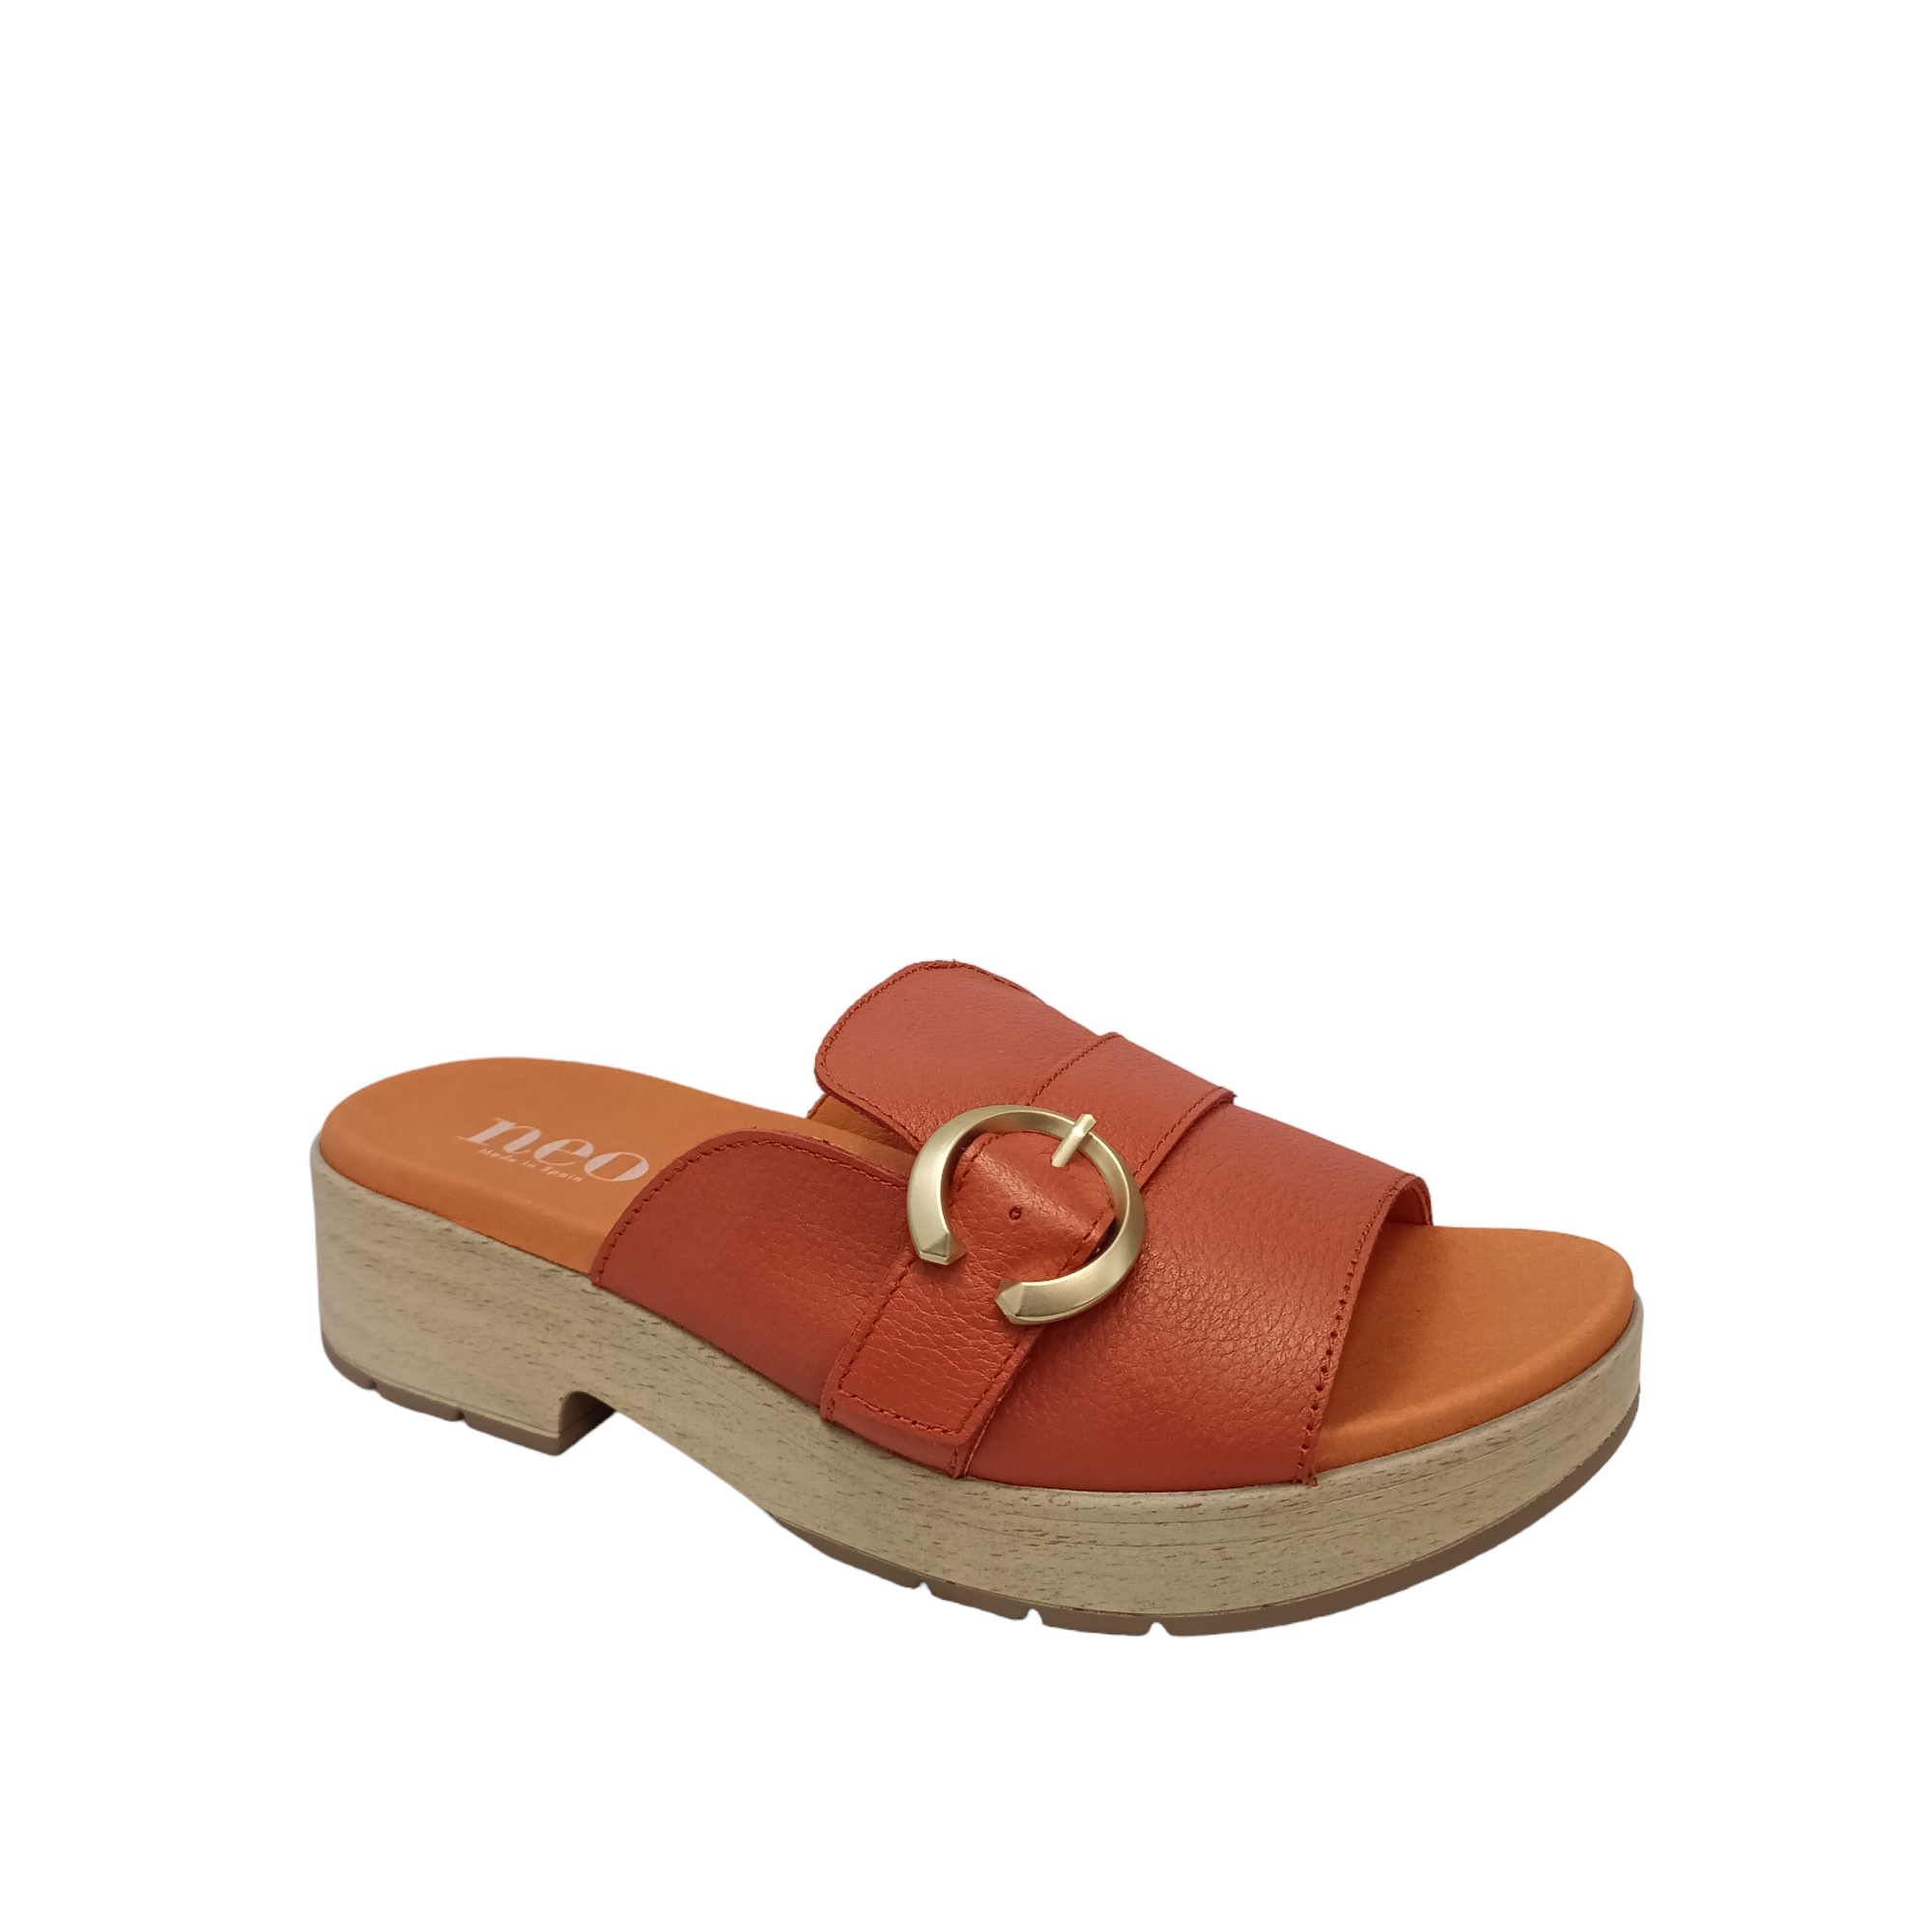 Huff Leather - shoe&me - Neo - Slide - Slides/Scuffs, Summer, Womens